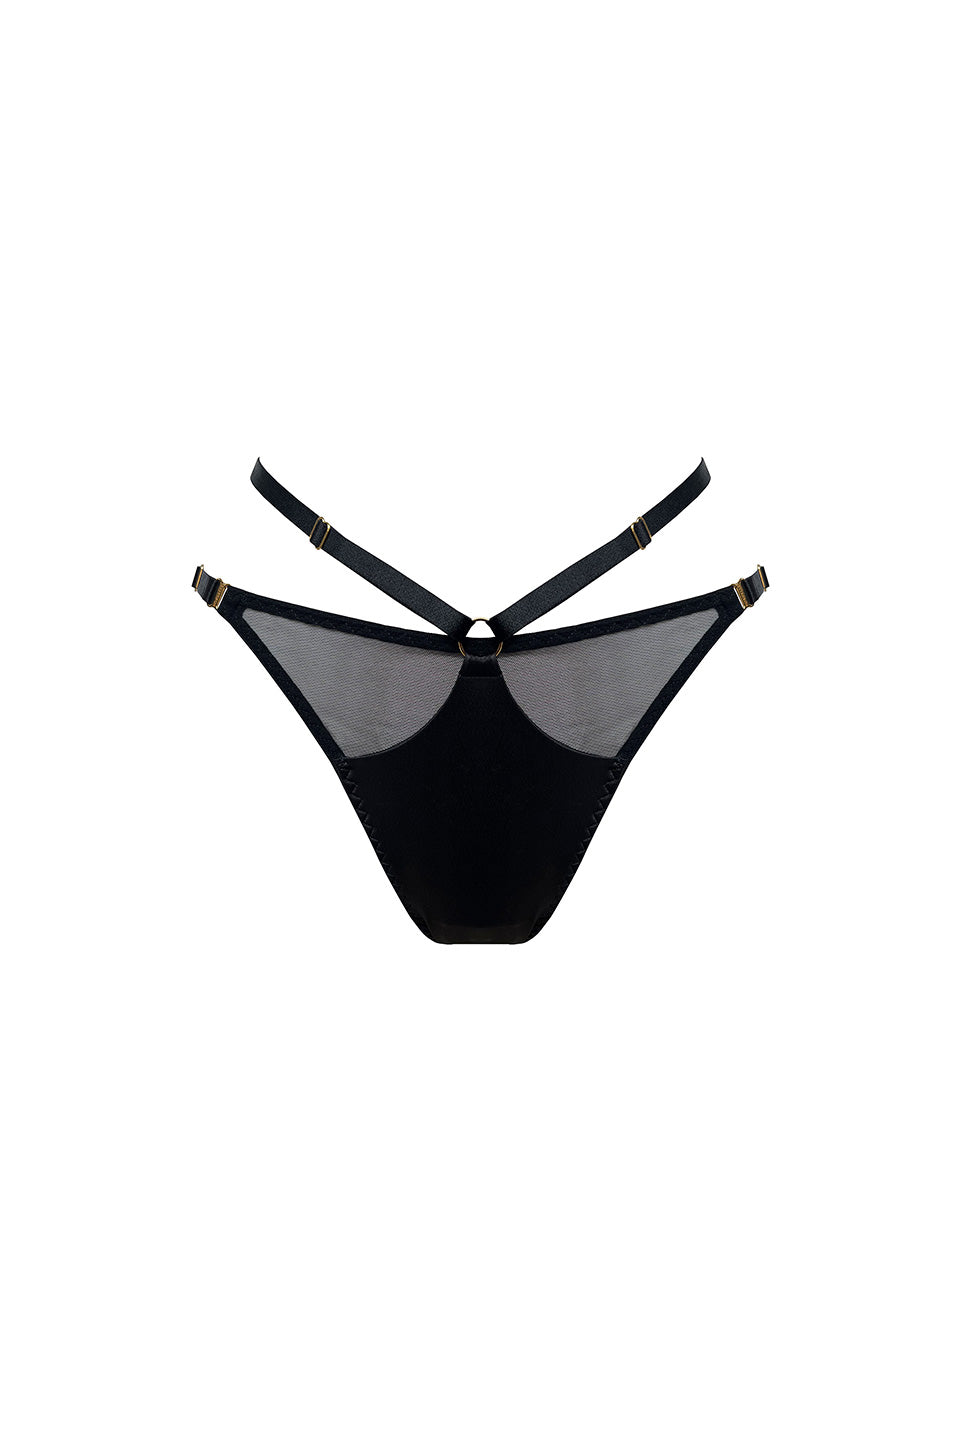 Thumbnail for Product gallery 1, Vero Brief Black